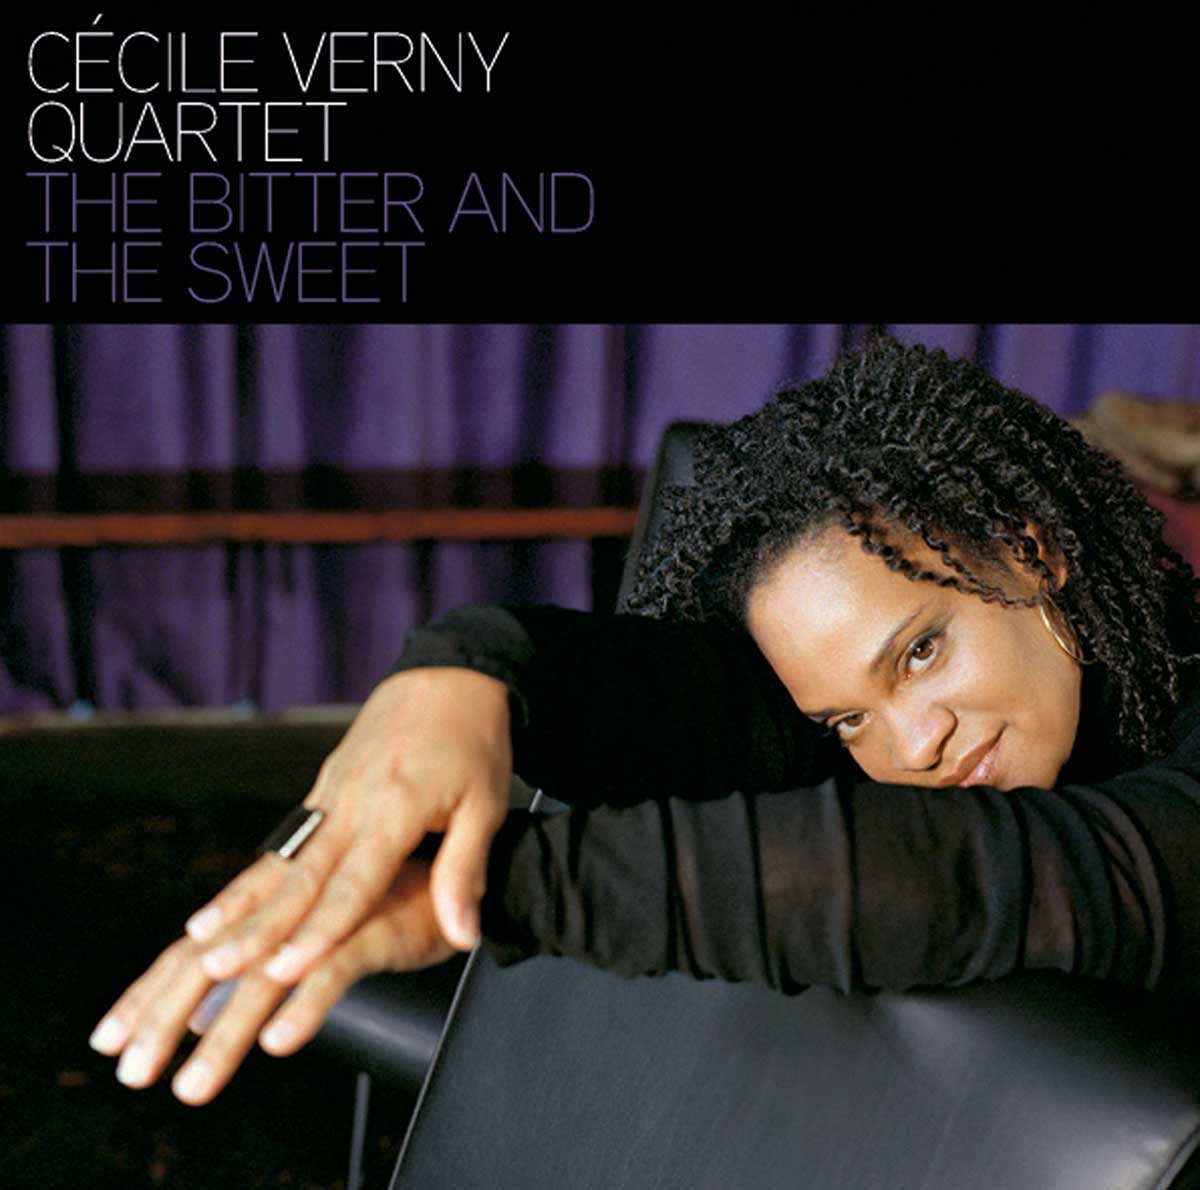 Cecile Verny Quartett The Bitter and the Sweat